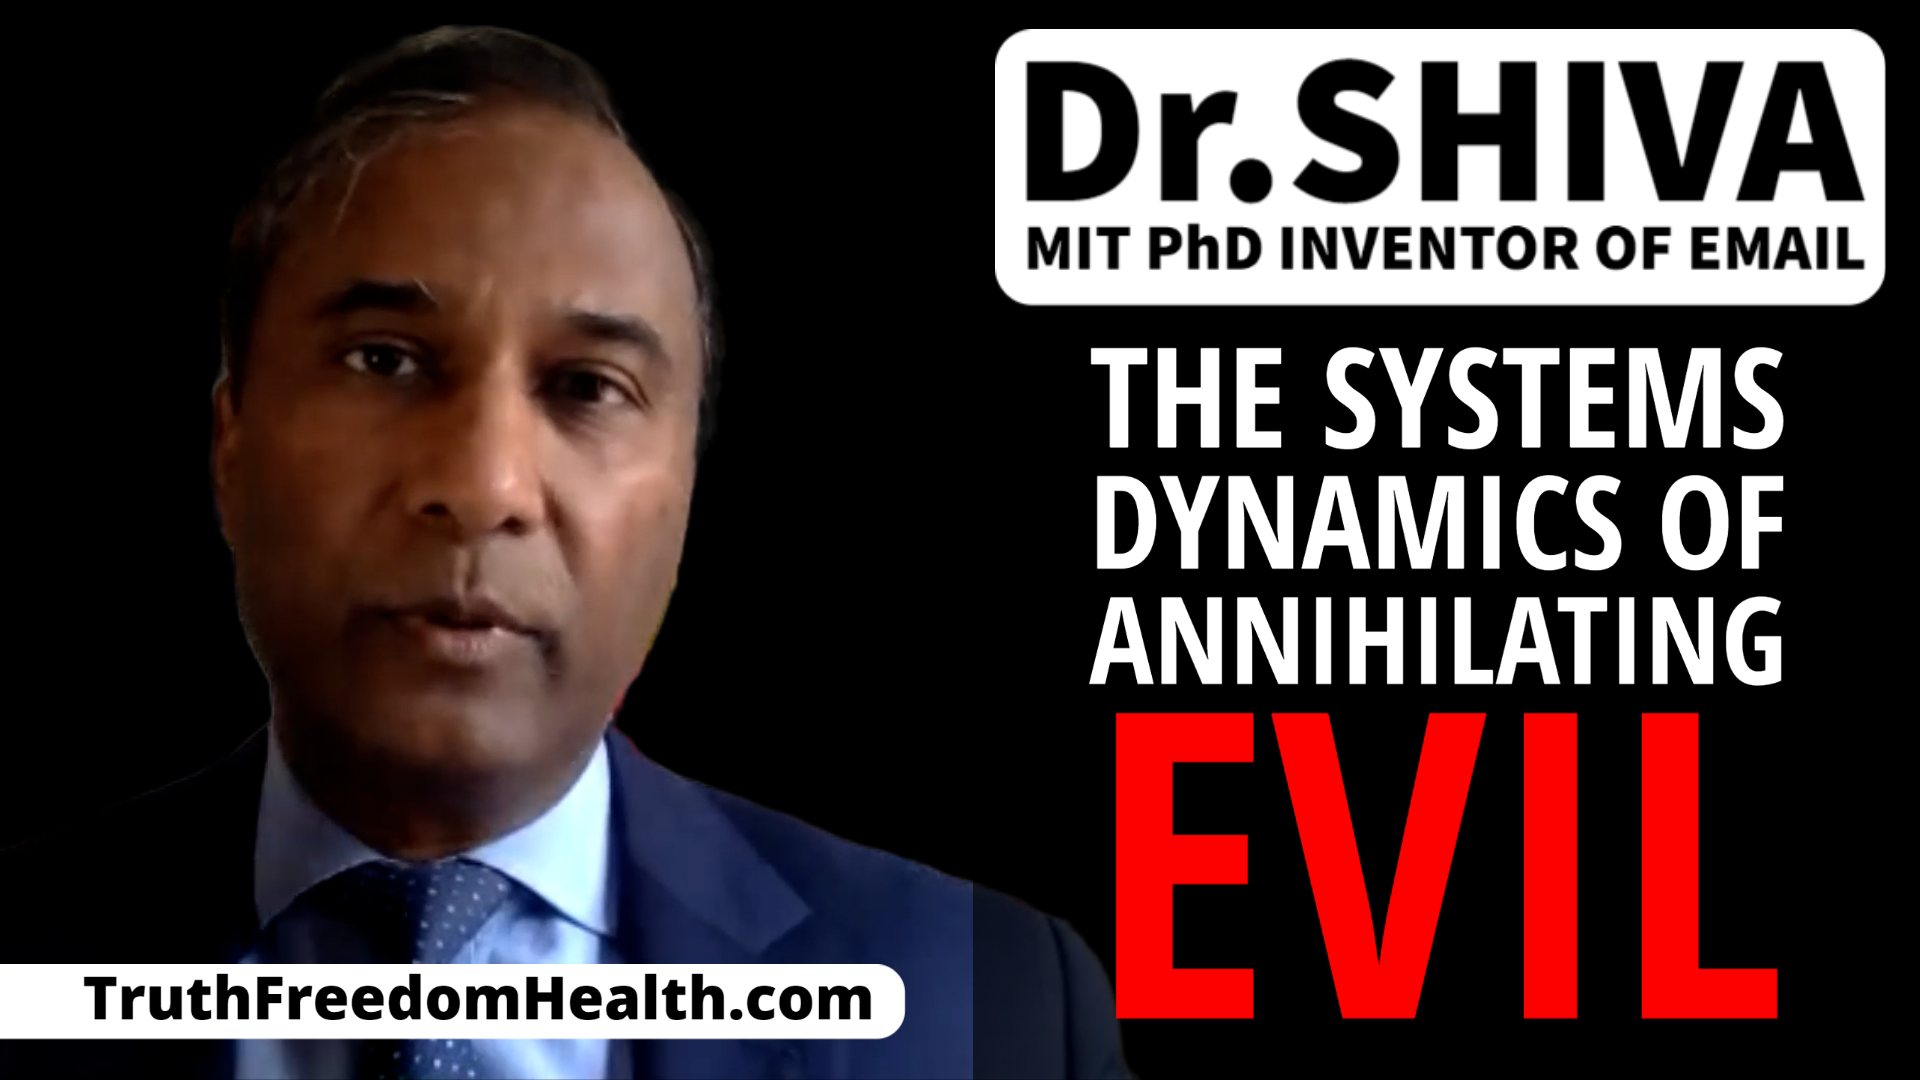 Dr.SHIVA LIVE: The Systems Dynamics of Annihilating Evil.